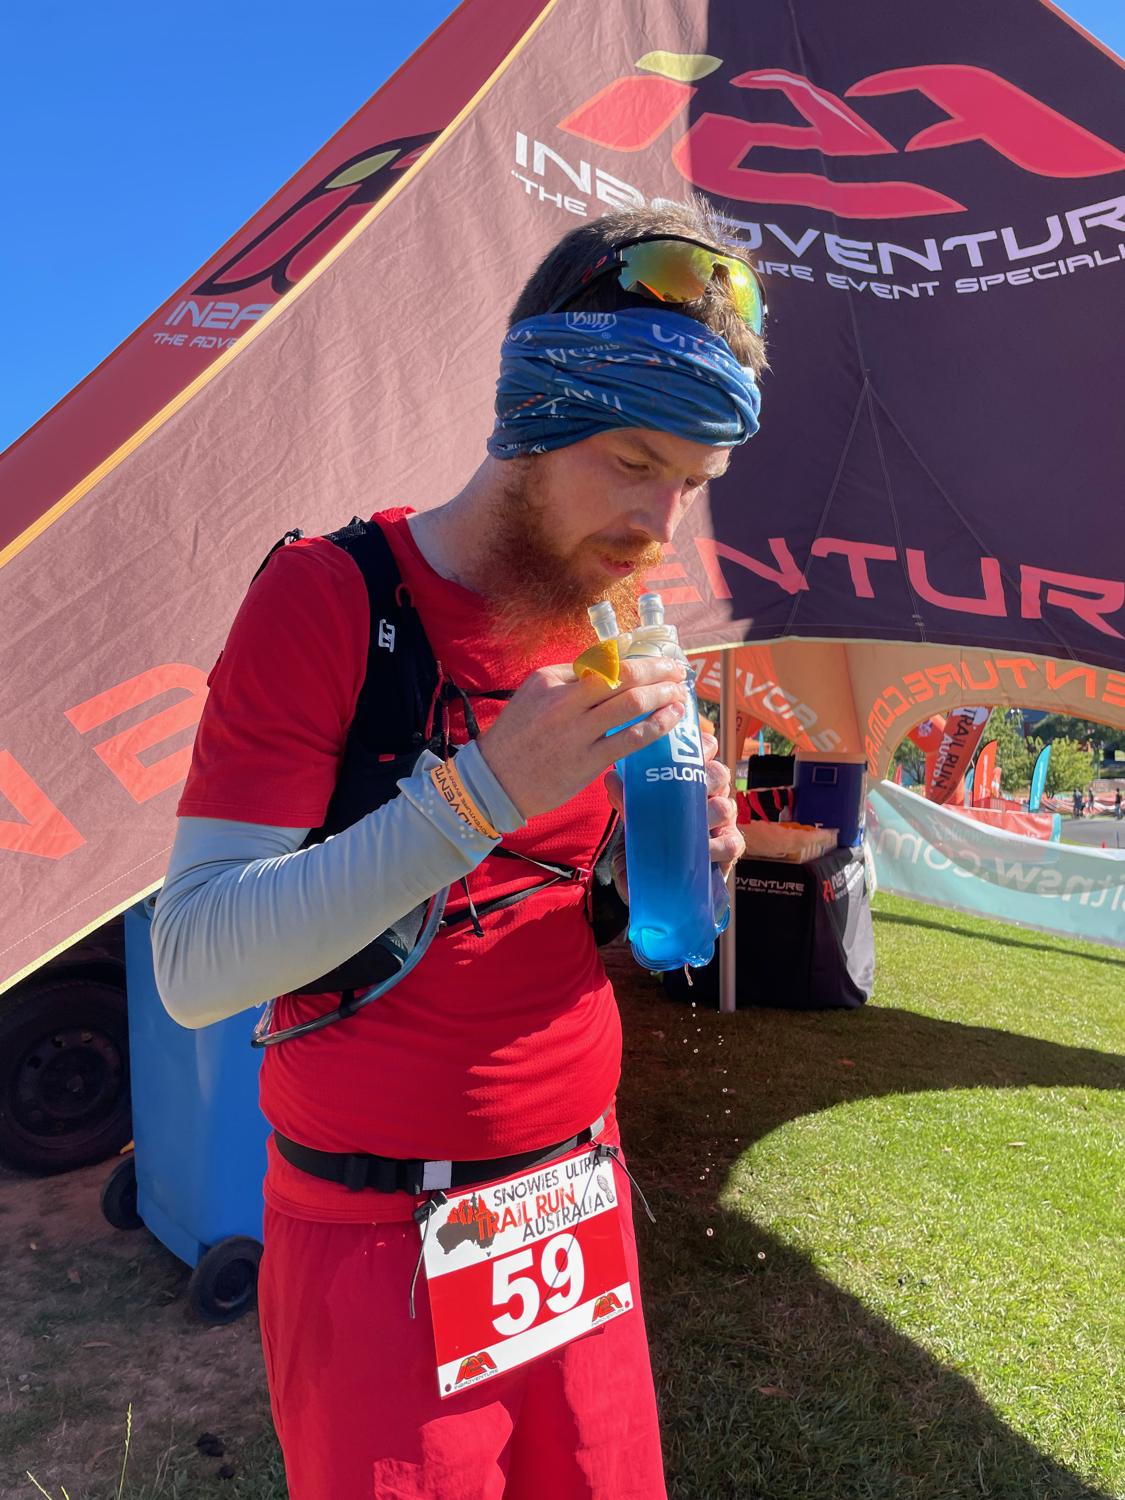 Race Report - UTRA Snowy Mountains 70km